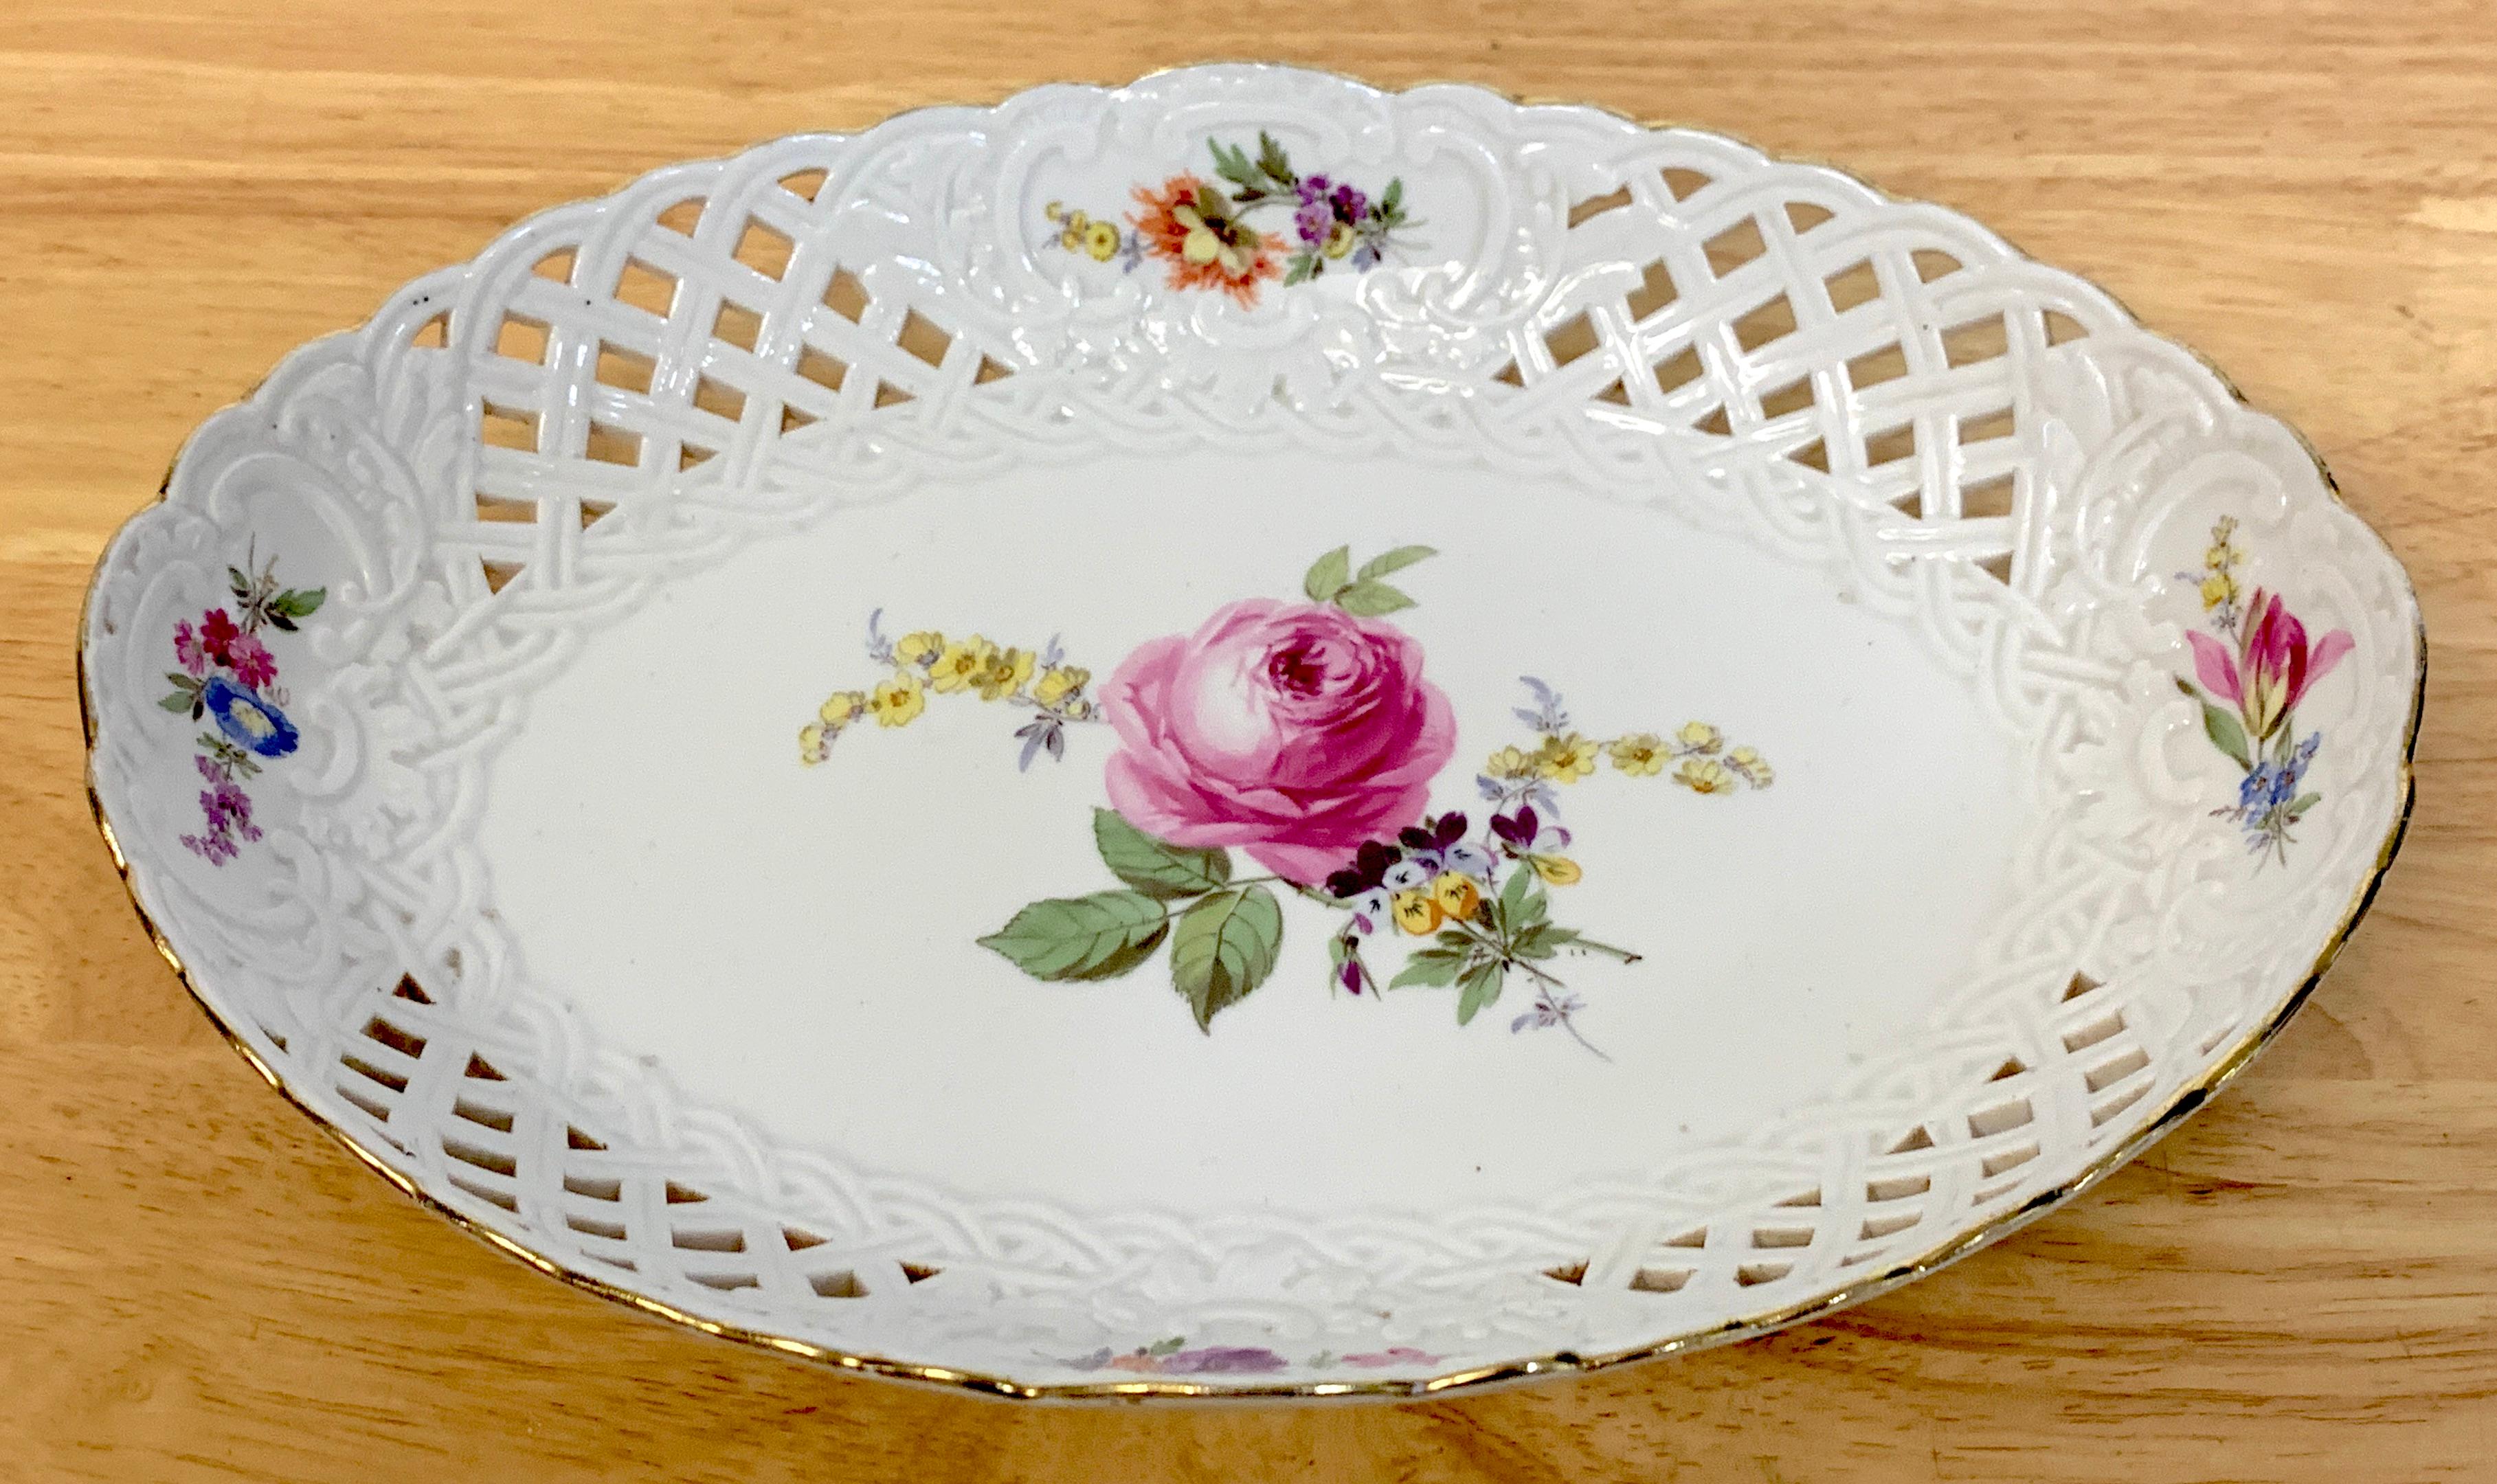 19th century Meissen floral painted reticulated oval basket, with gilt rim, pierced surround, hand painted with center rose bouquet, floral sprays, inside and out.
      